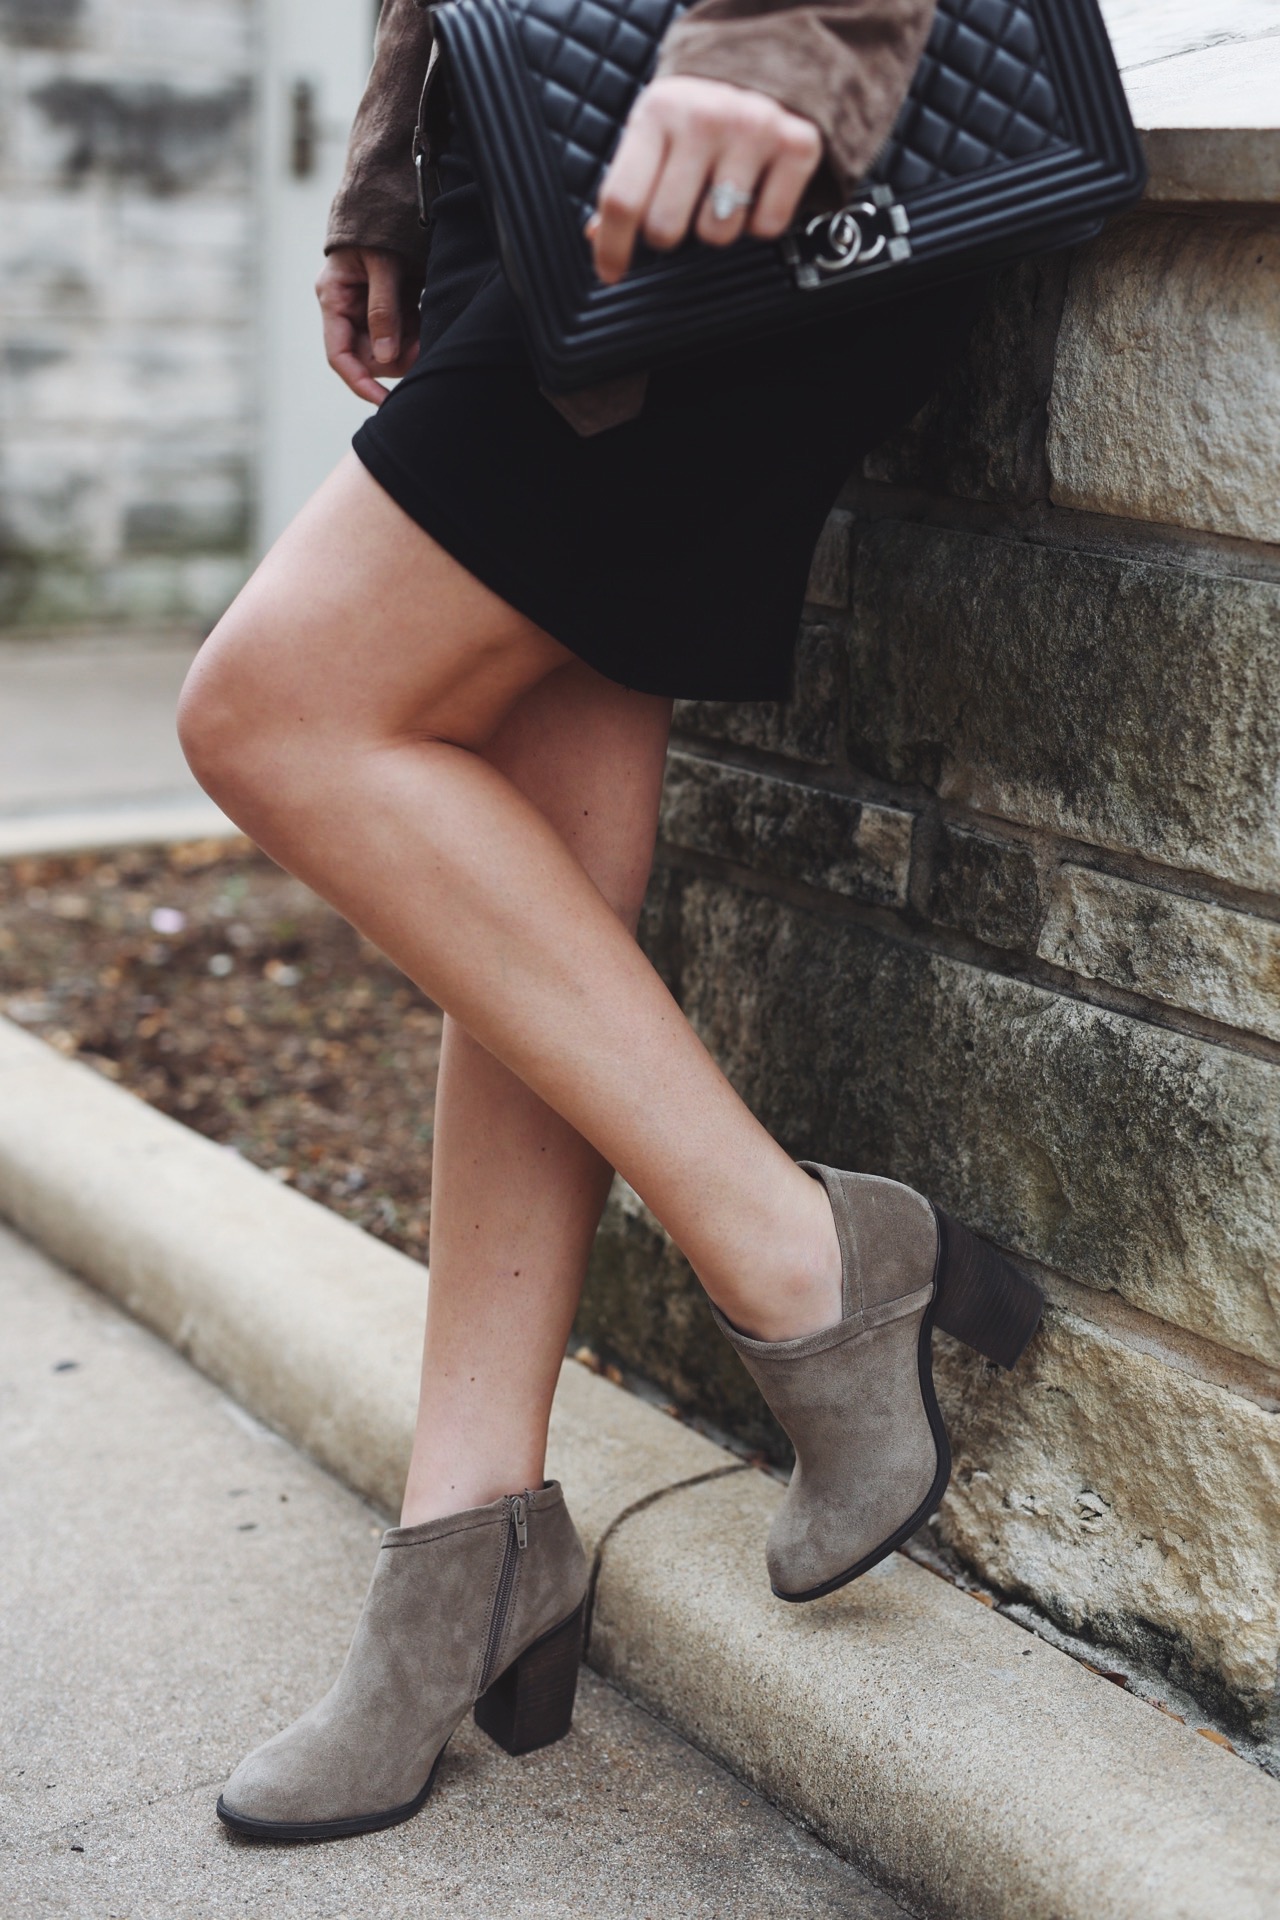 DTKAustin shares her favorite Fall/Winter nude booties that are all under $100 from Nordstrom. | affordable nude booties | nude bootie style | styling a nude bootie | fall shoes | must-have fall shoes | fall style tips | what to wear for fall | cool weather fashion | fashion for fall | style tips for fall | outfit ideas for fall || Dressed to Kill #nudebooties #bootieseason #fallshoes #fallstyle